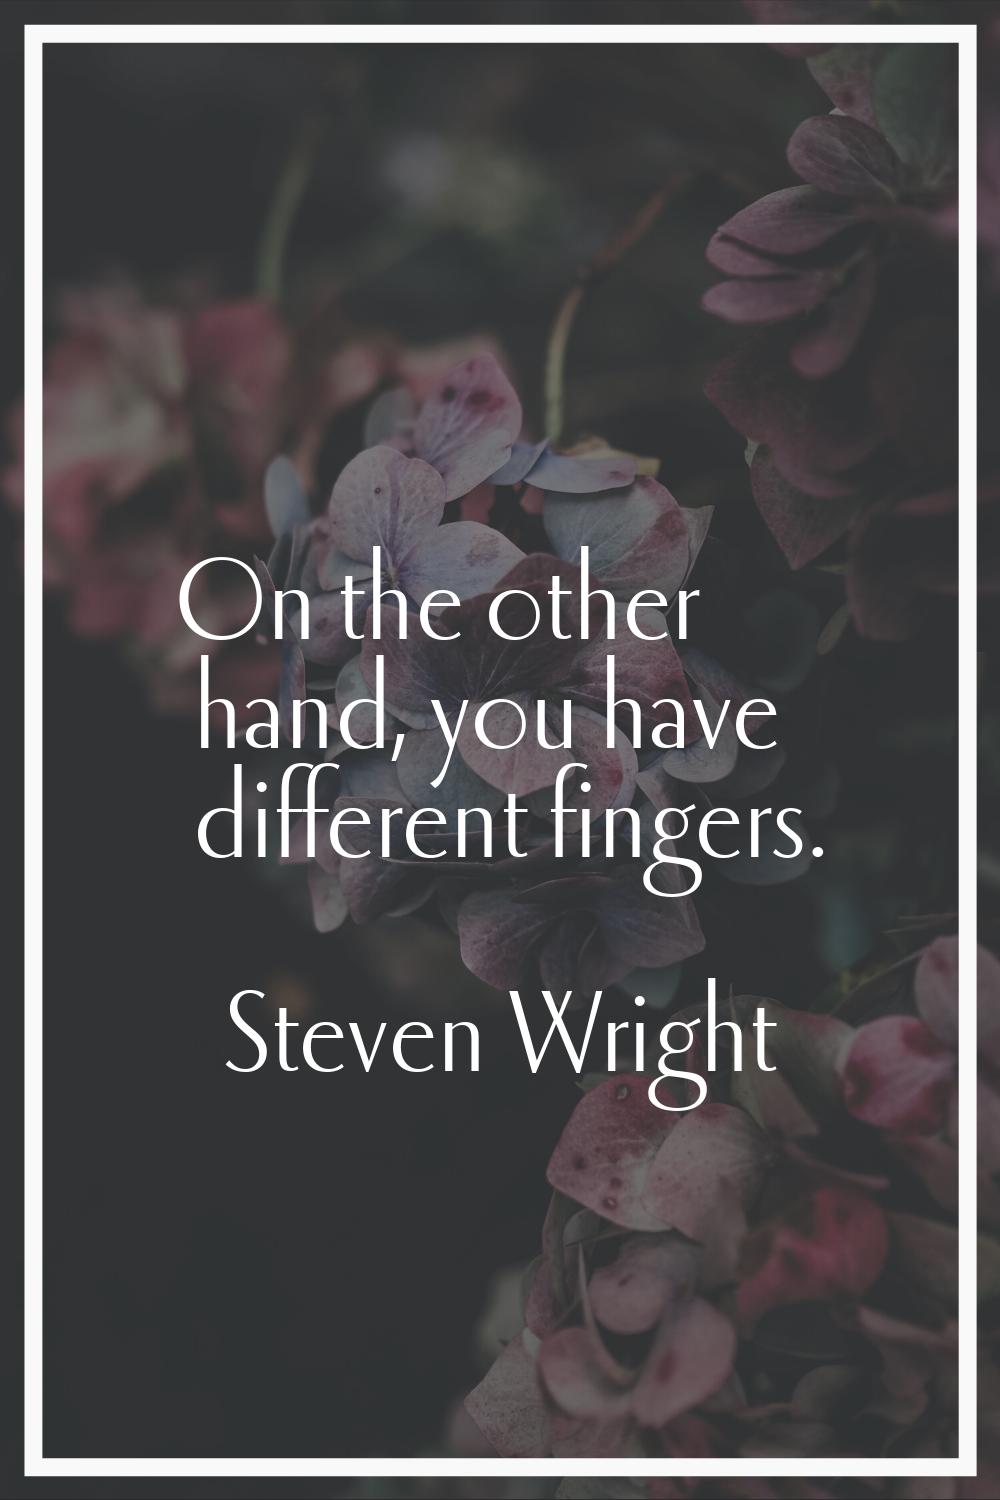 On the other hand, you have different fingers.